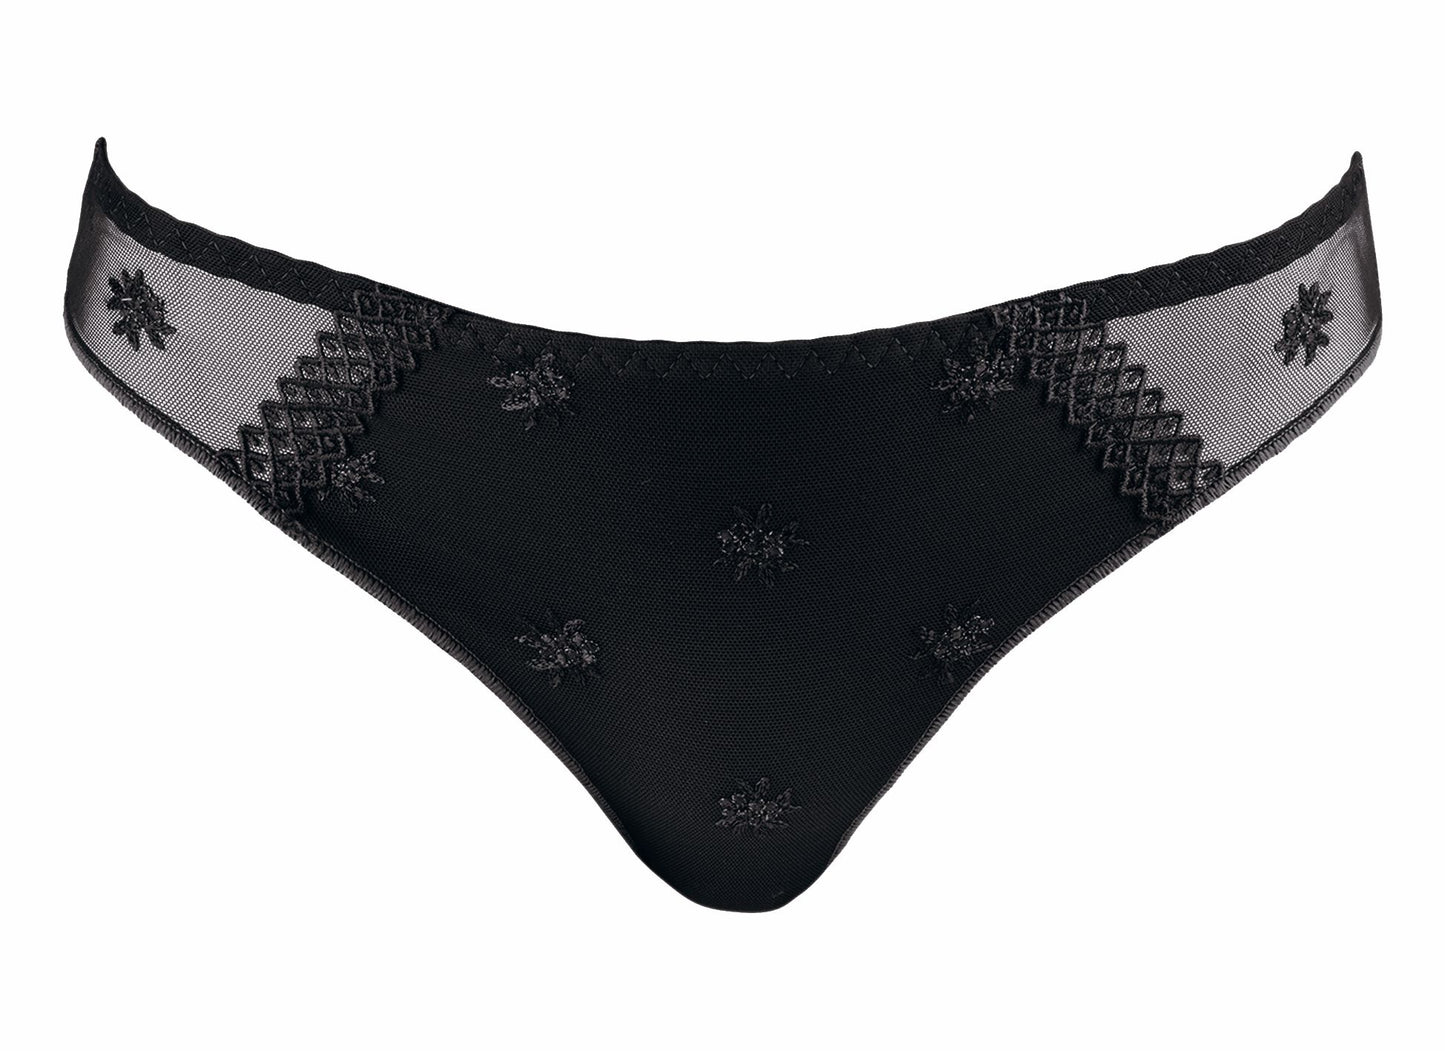 The Louisa Bracq brief from the Chantilly line provides a chic and refined look, featuring a fine tulle front adorned with a geometric bordered panel surrounding by iridescent medallions.